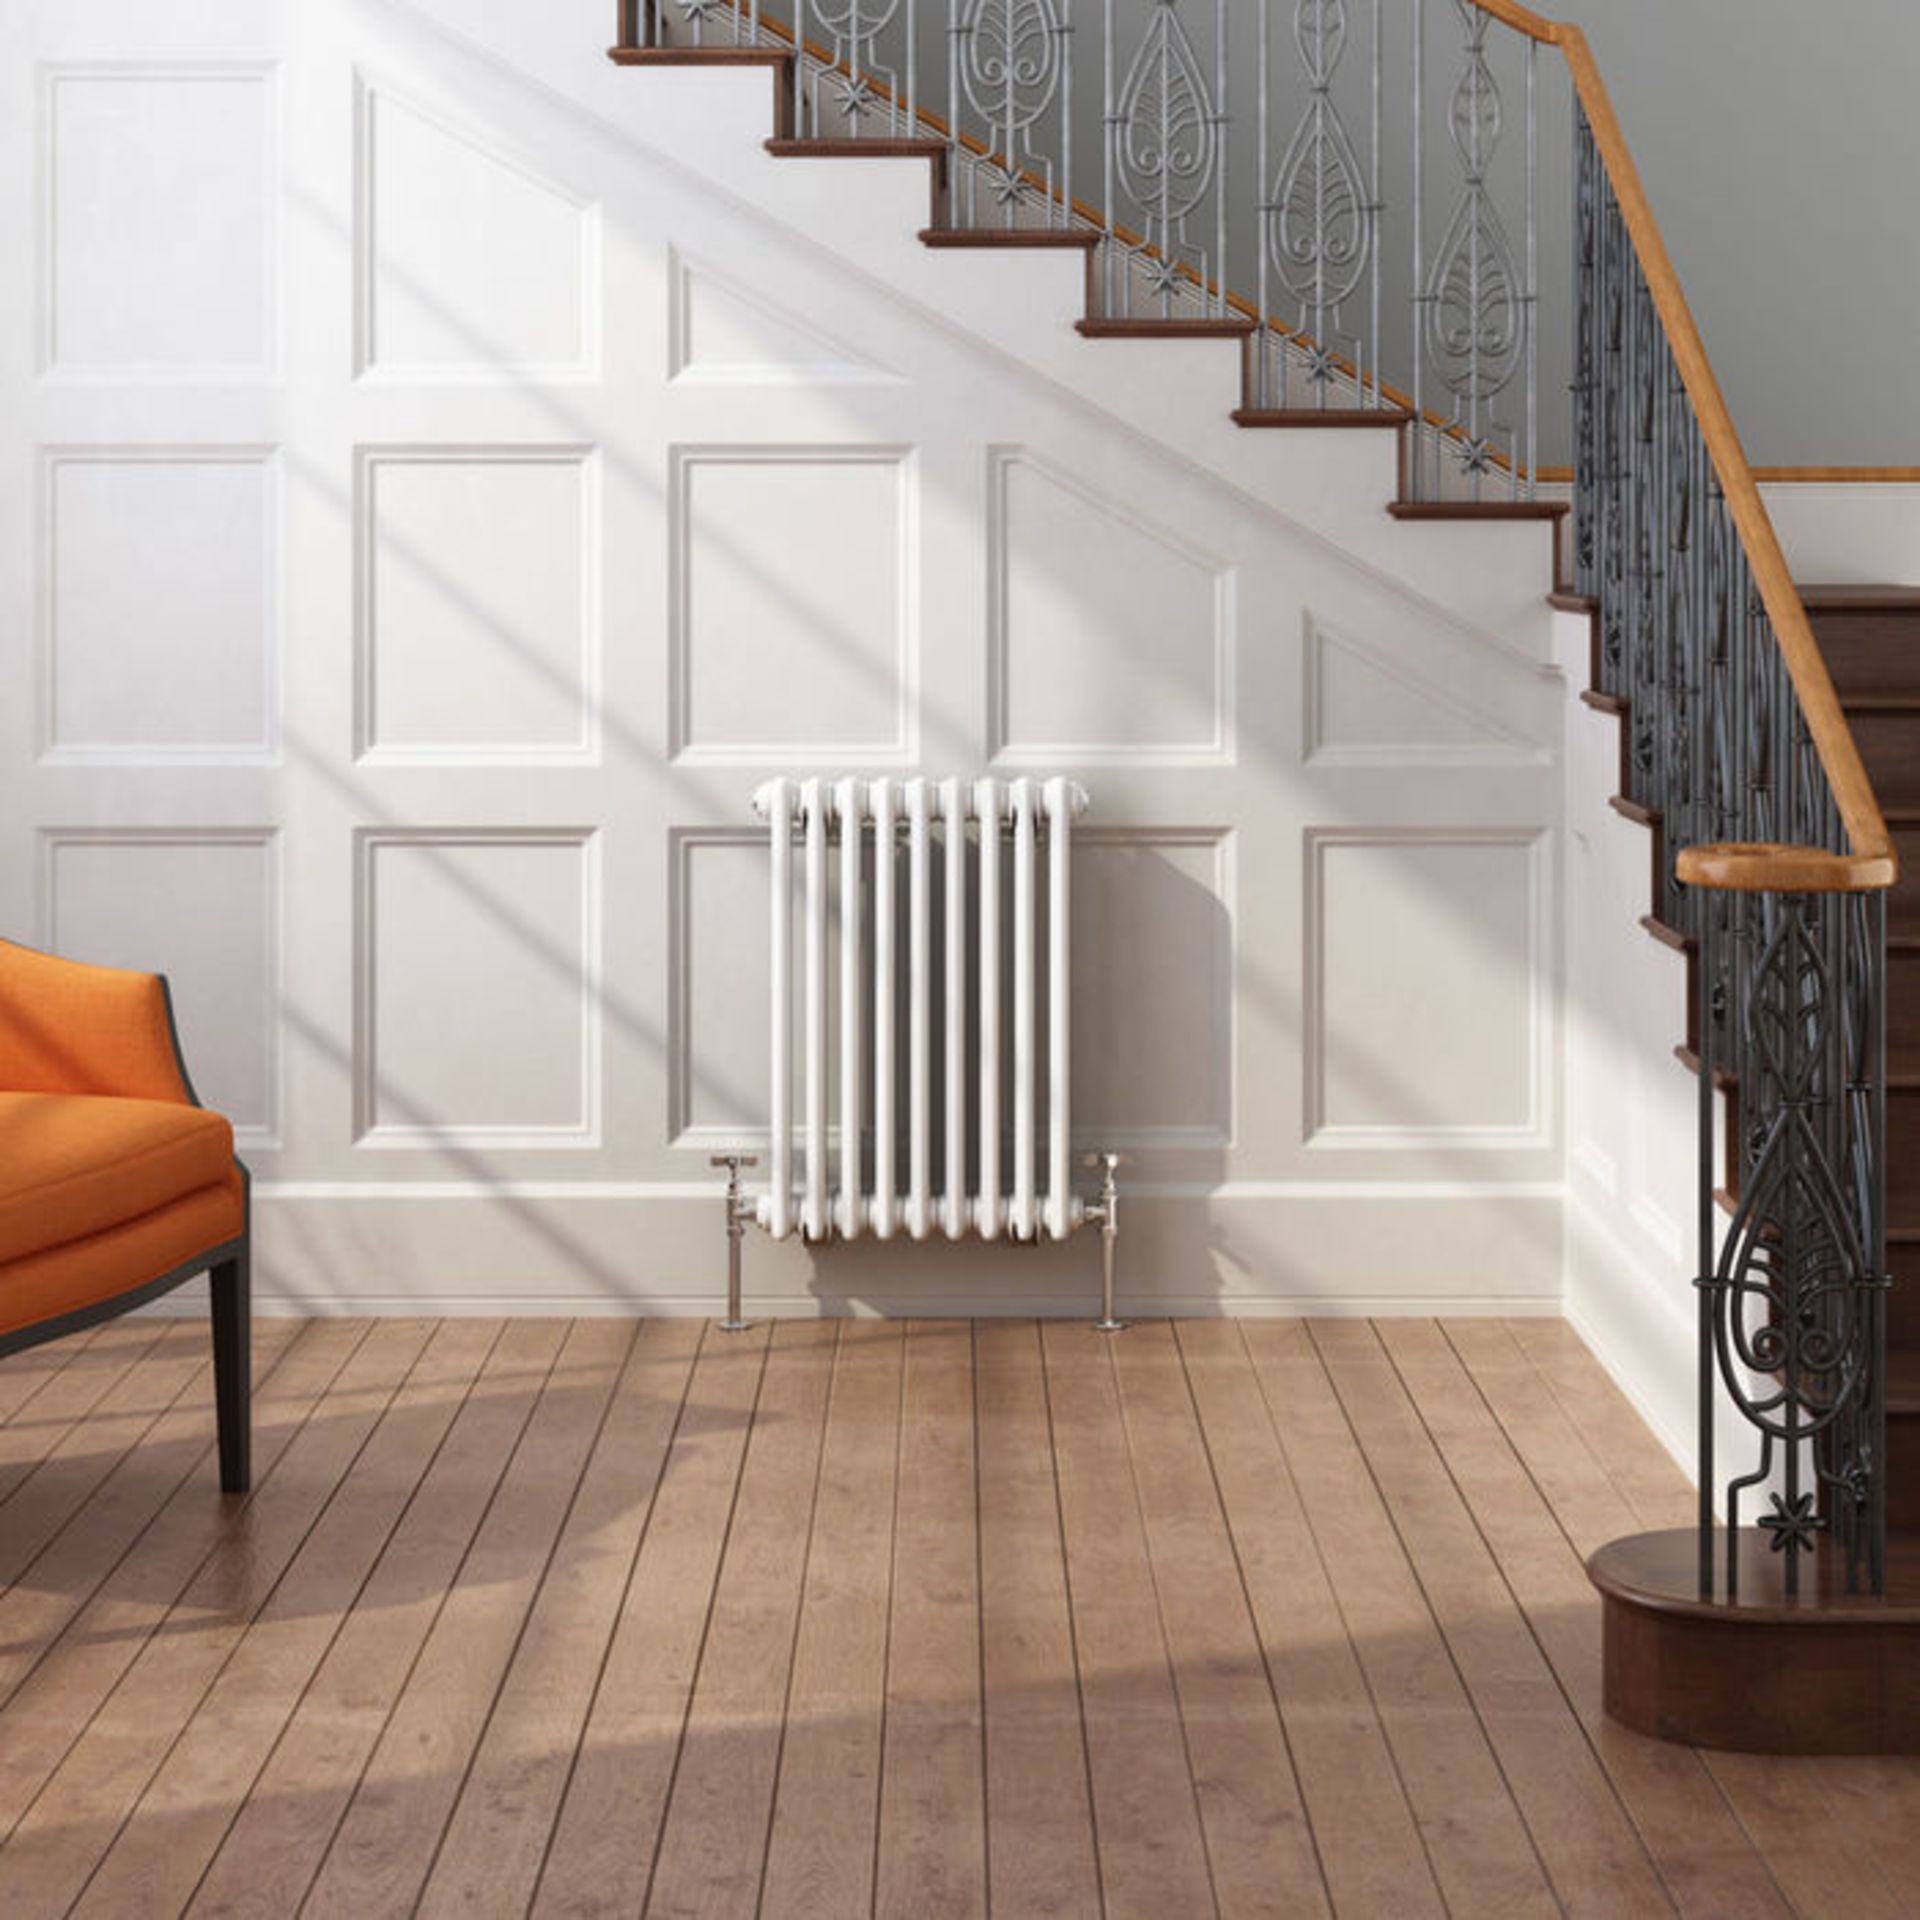 Brand New 600x420mm White Double Panel Horizontal Colosseum Traditional Radiator. RRP £199.99. RC577 - Image 2 of 3